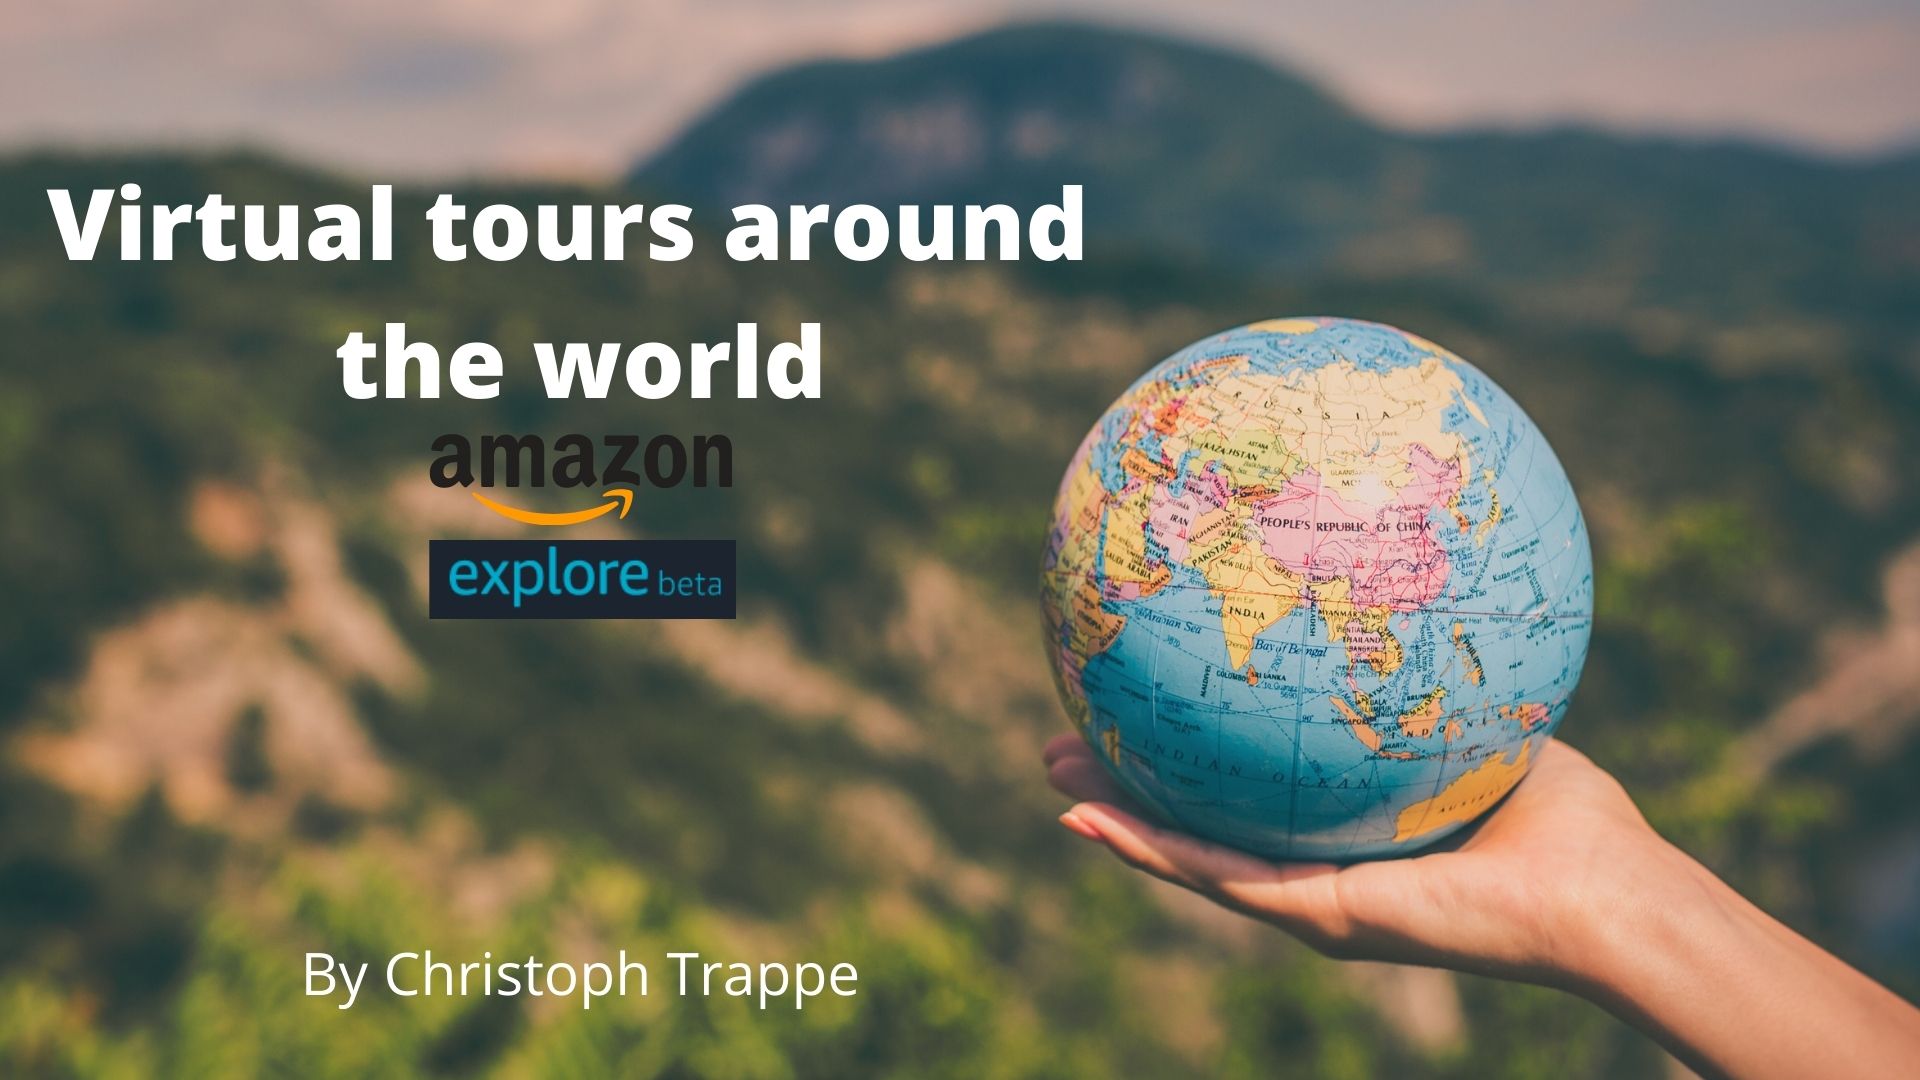 Virtual tours around the world with